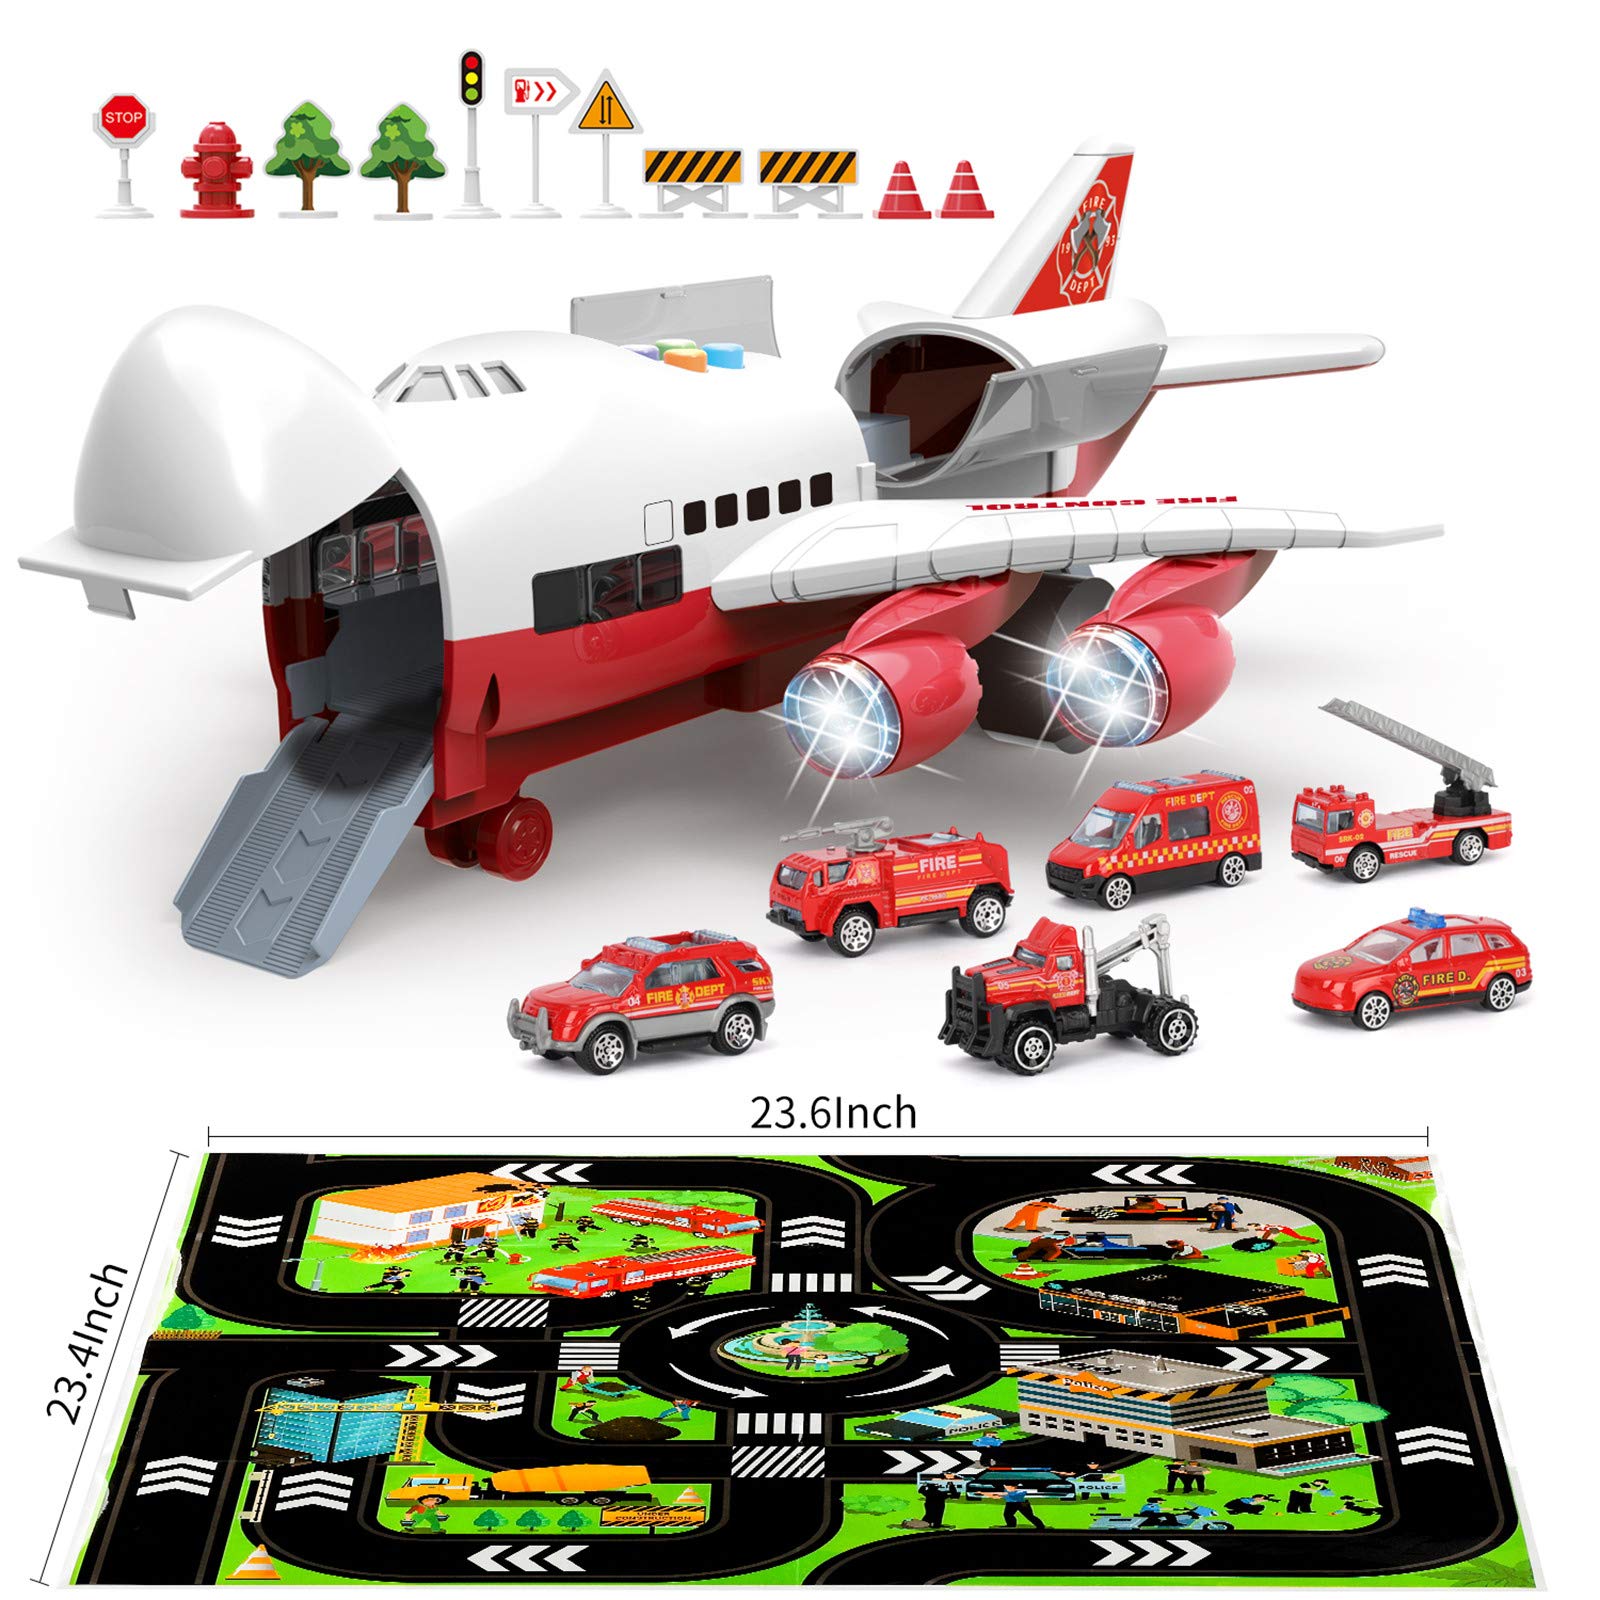 Newly Arrival Remote Control Car For 2 Year Old - BeebeeRun Transport Cargo Airplane-Car Toys for Boys with Large Play Mat, Sounds Buttons Flashing Light,Vehicles Fire Trucks for Kids Toddlers,Gif...